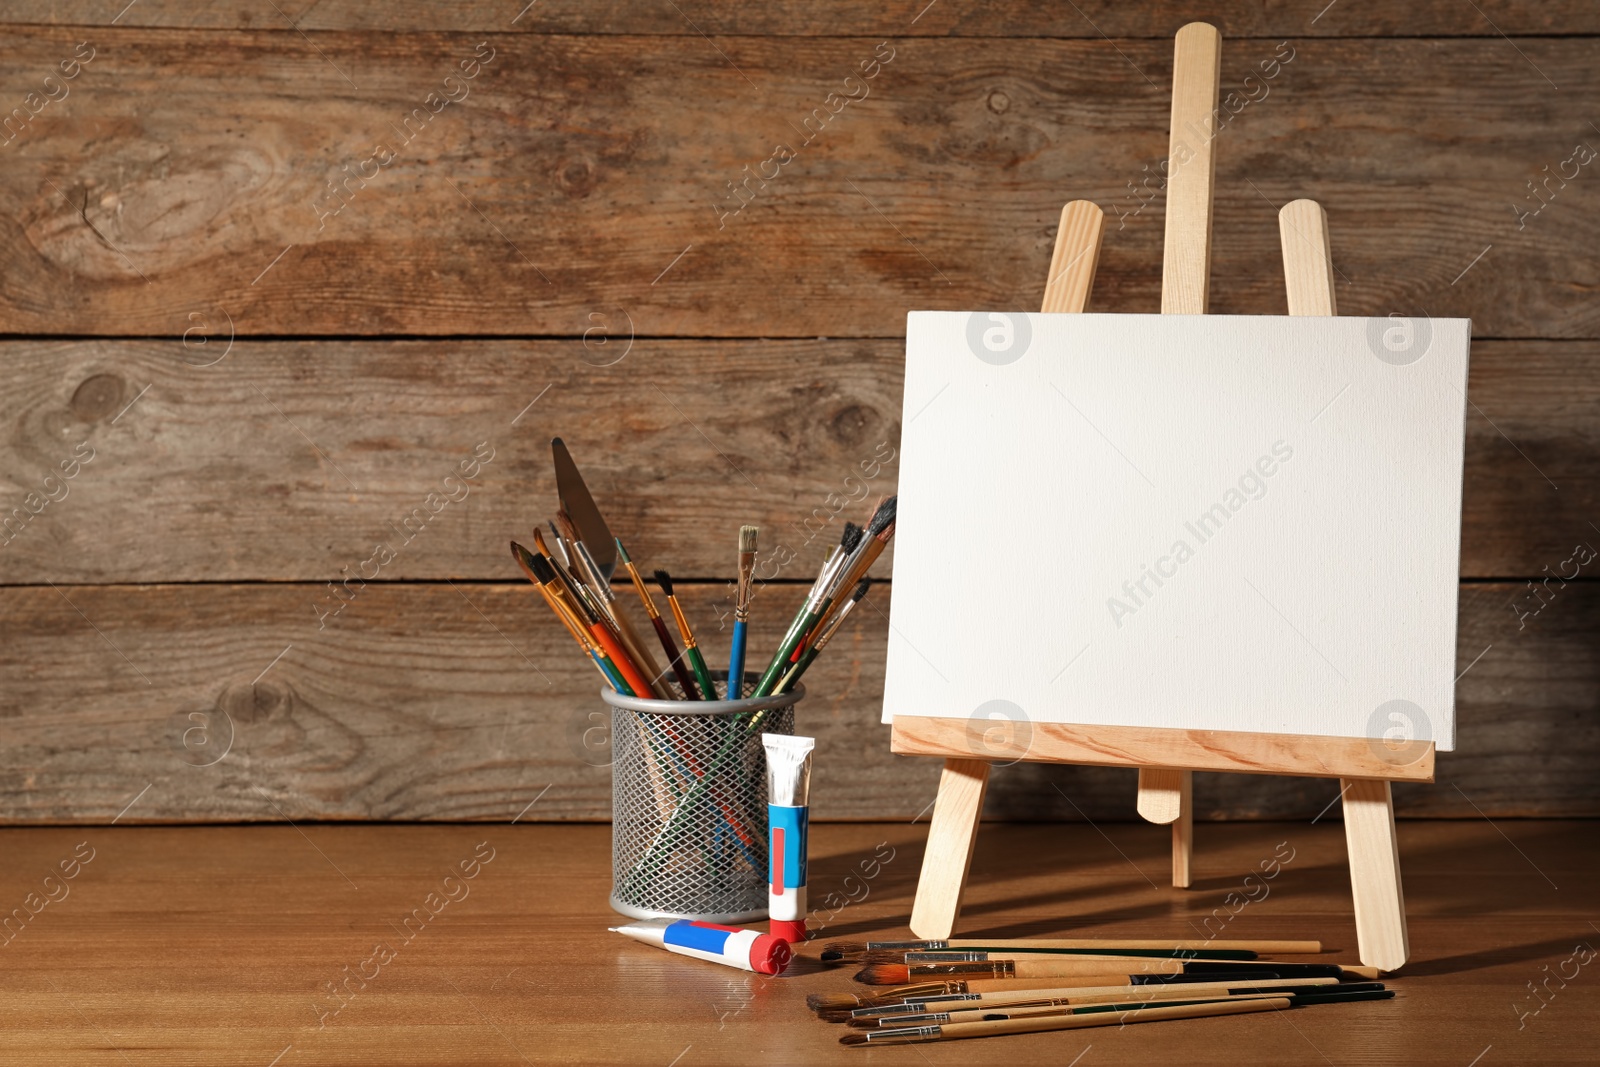 Photo of Easel with blank canvas board and painting tools for children on table near wooden wall. Space for text